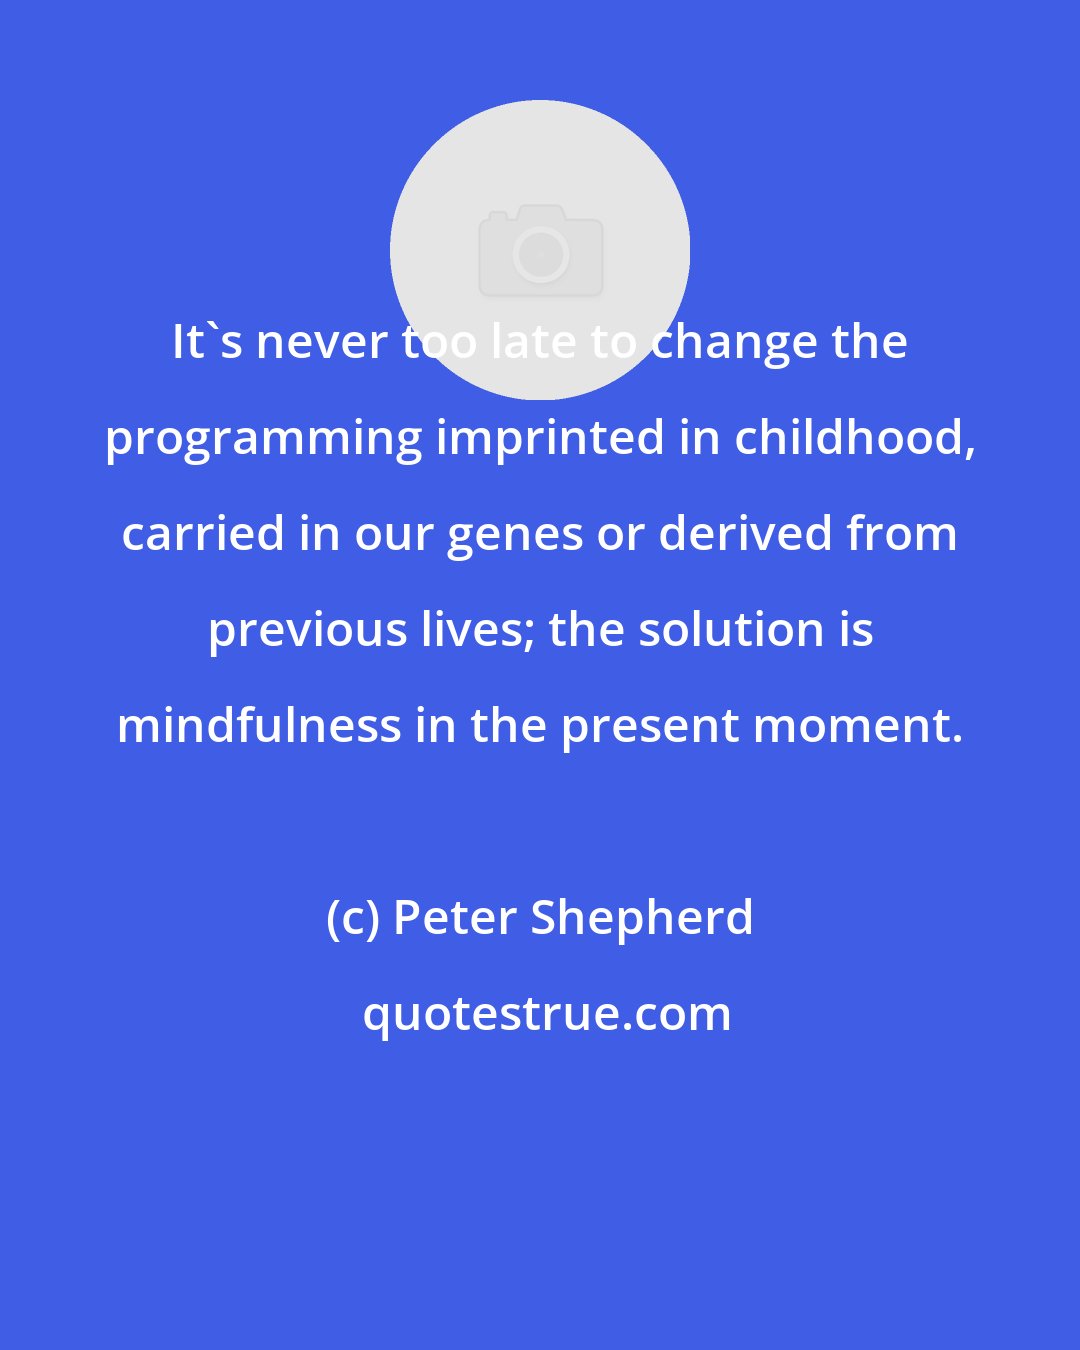 Peter Shepherd: It's never too late to change the programming imprinted in childhood, carried in our genes or derived from previous lives; the solution is mindfulness in the present moment.